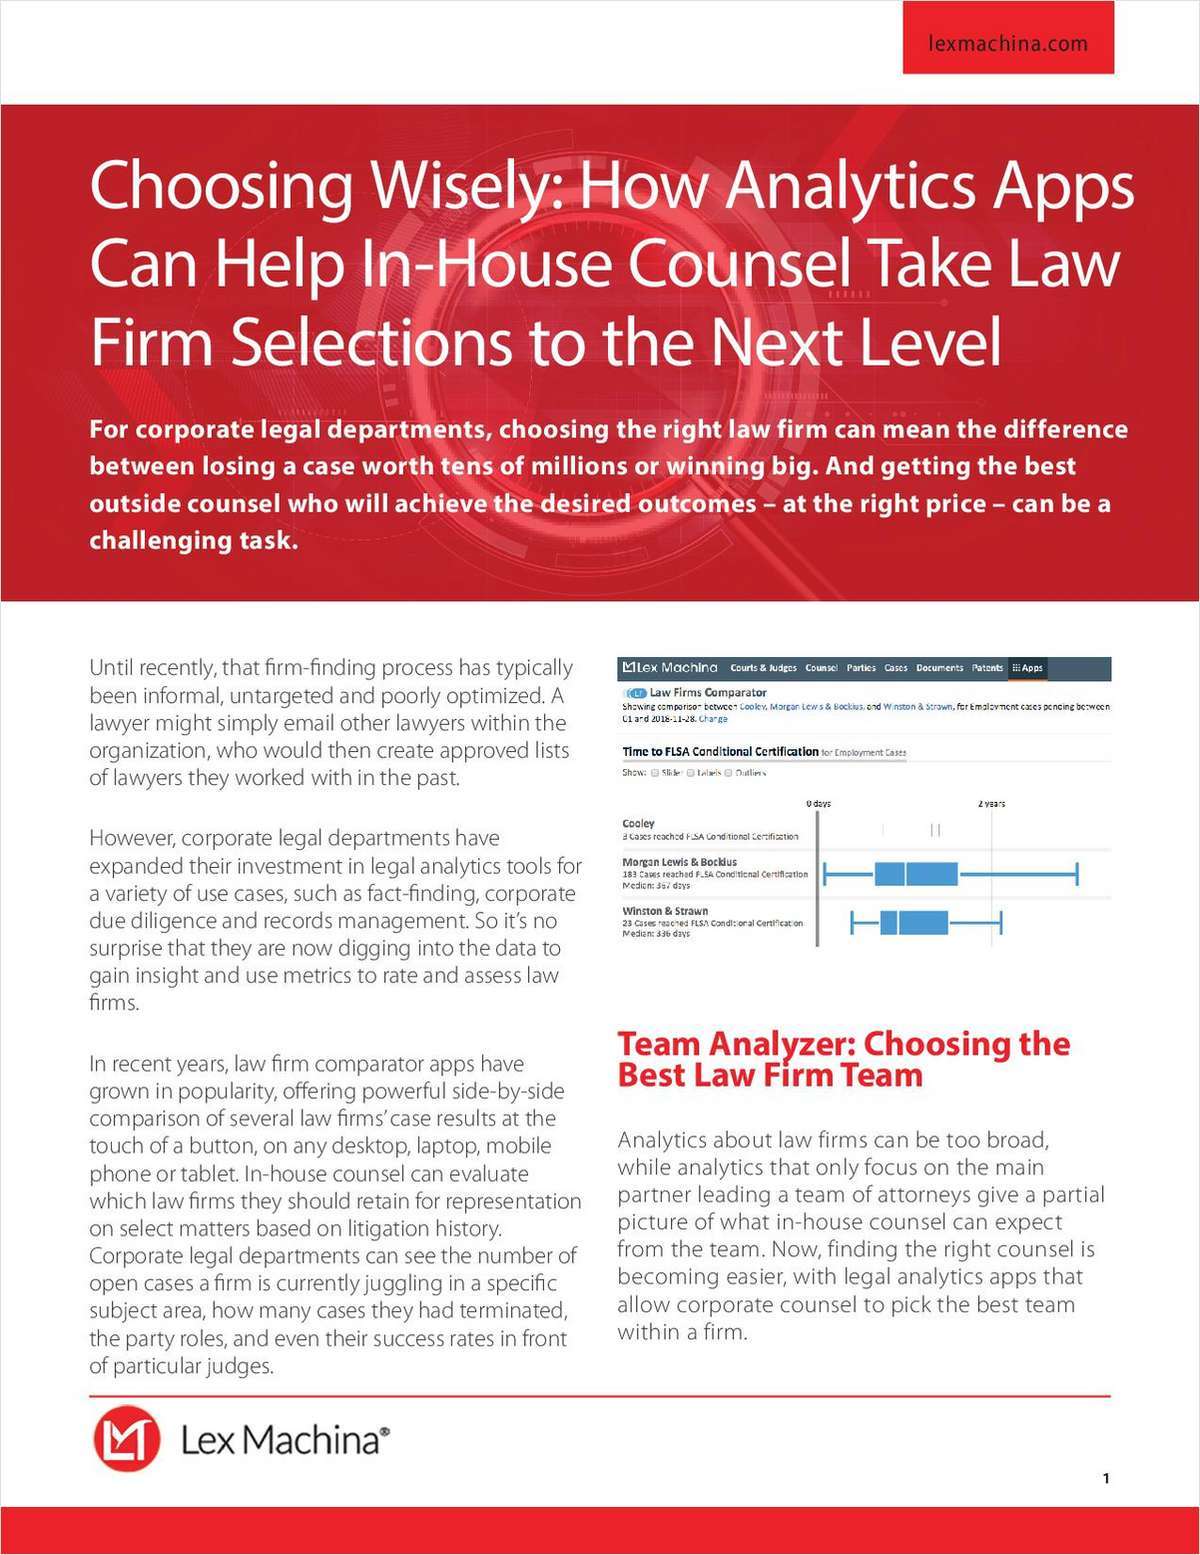 How In-House Counsel can Take Law Firm Selection to the Next Level